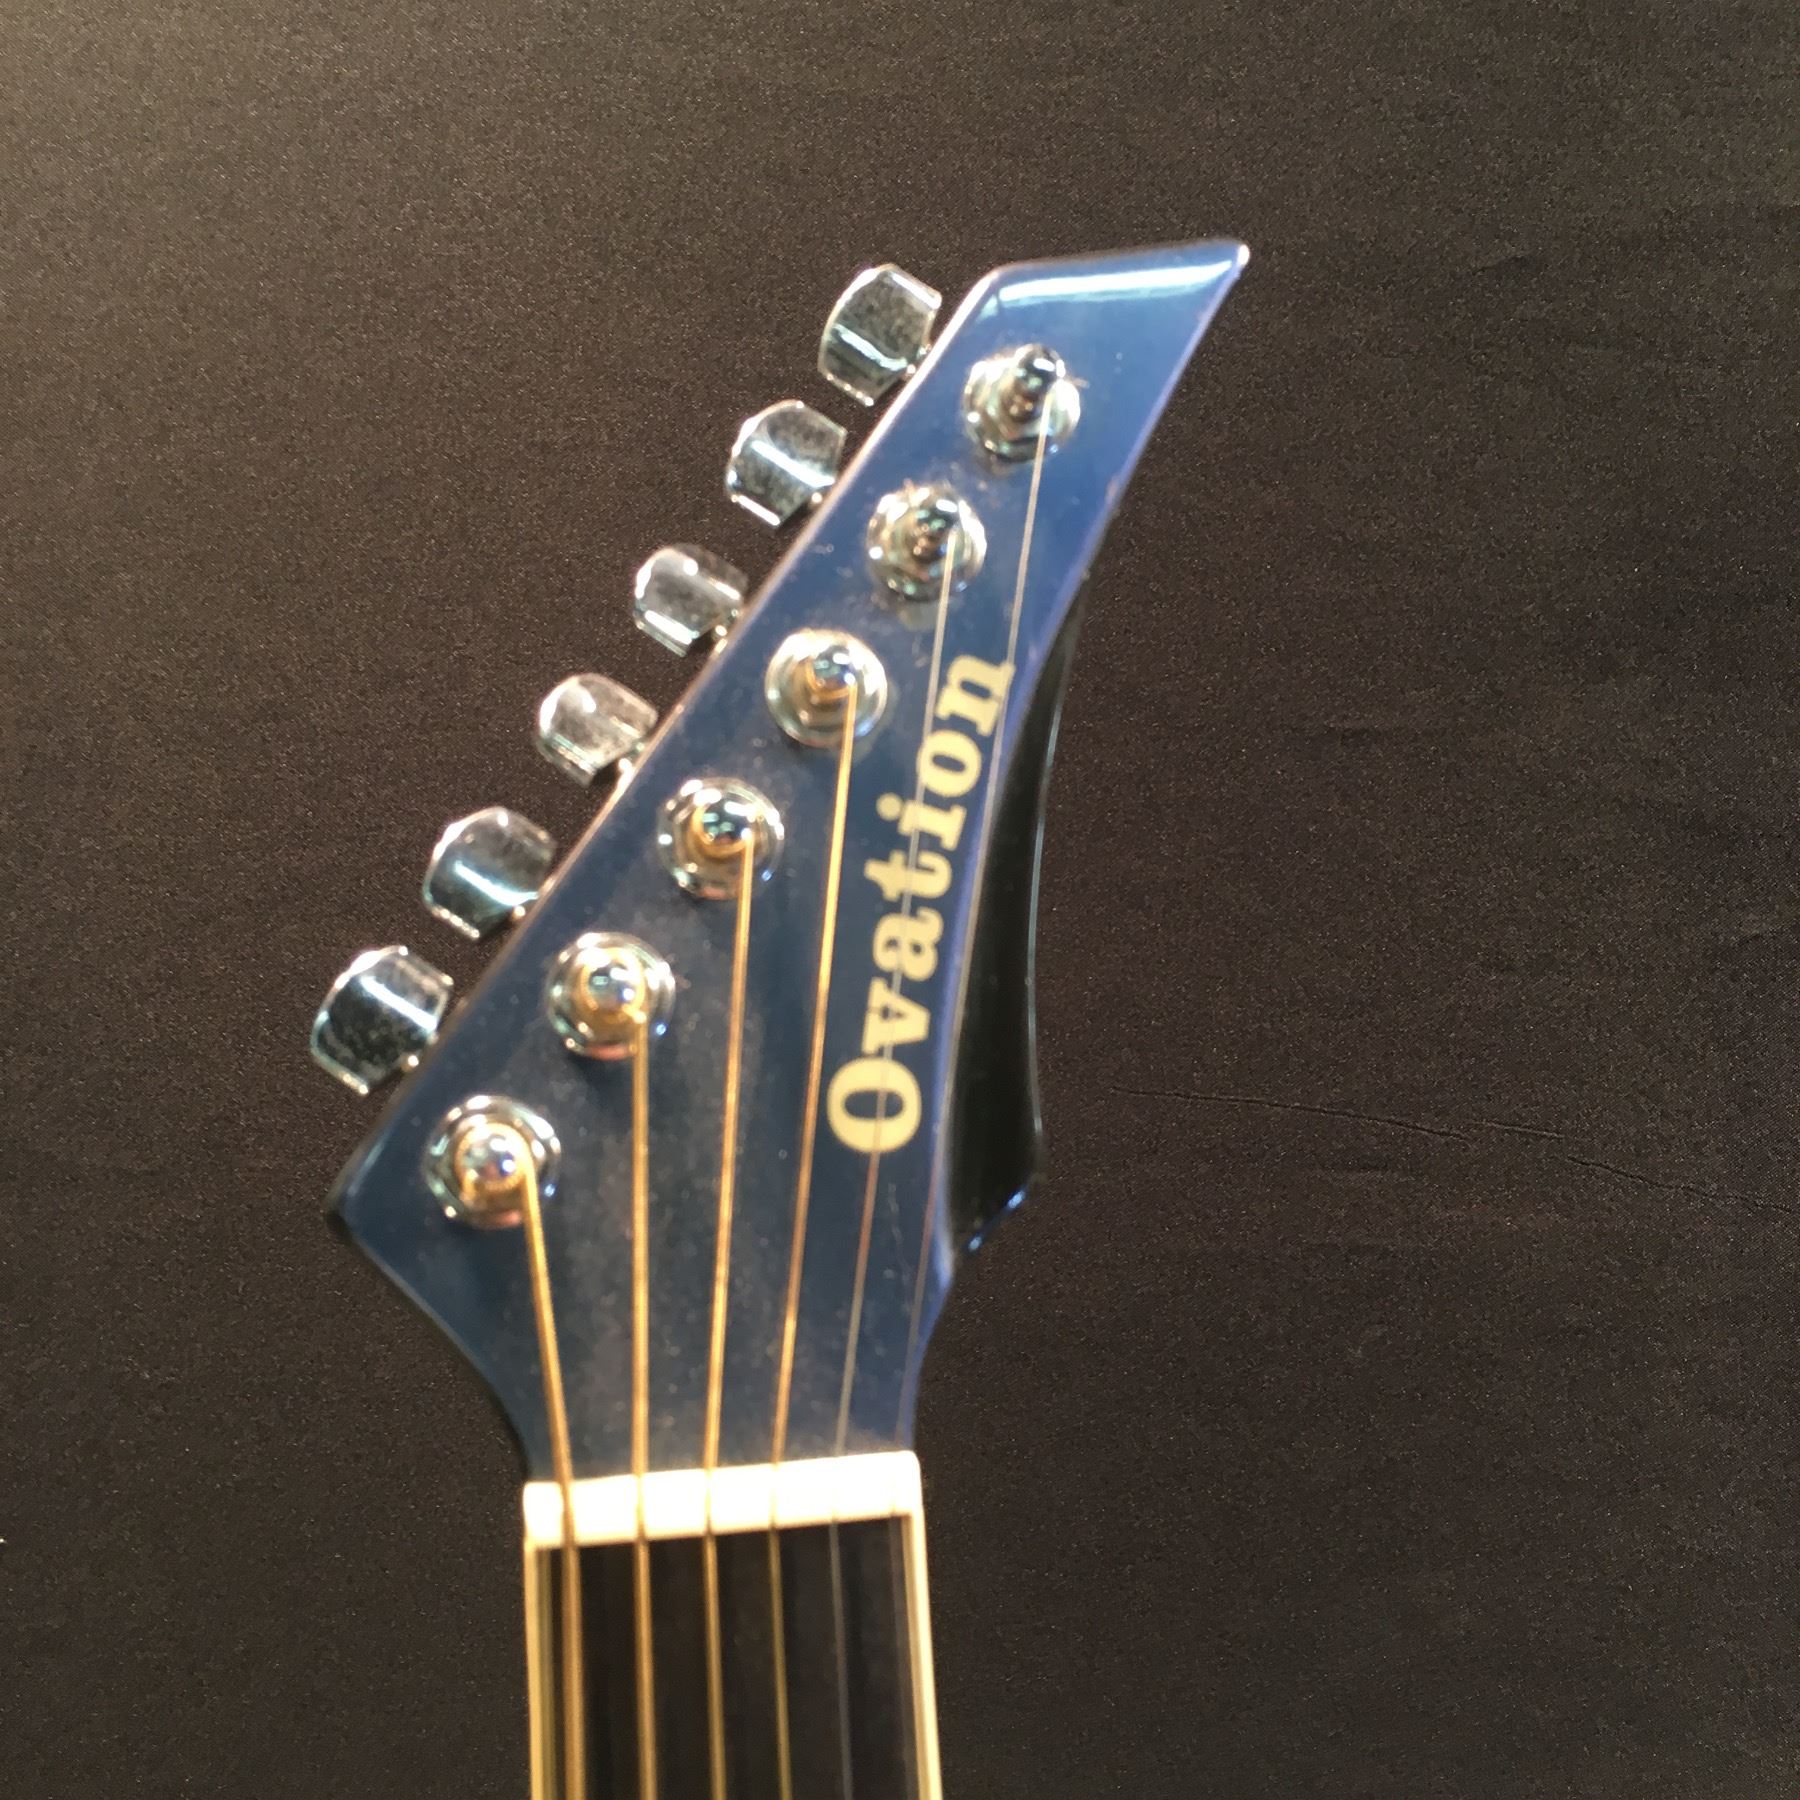 Ovation applause serial numbers